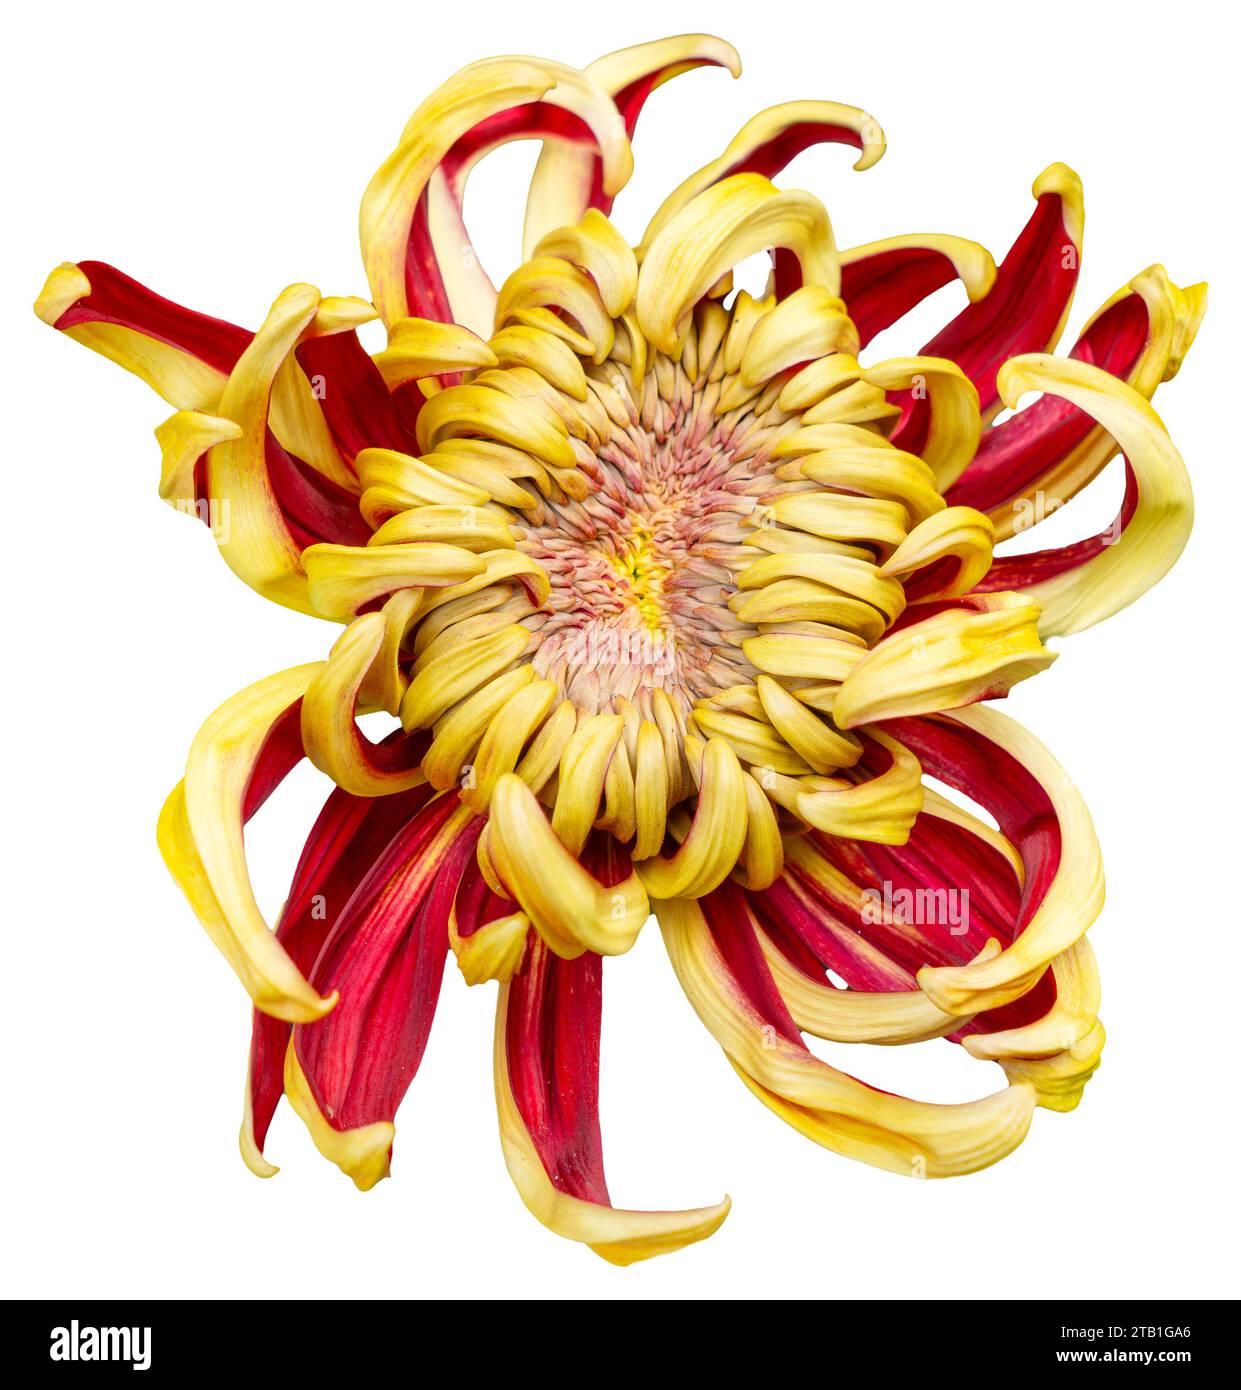 Top view of a yellow and red flower isolated on white background. Isolate a large flower with clipping path. Taipei Chrysanthemum Exhibition. Stock Photo